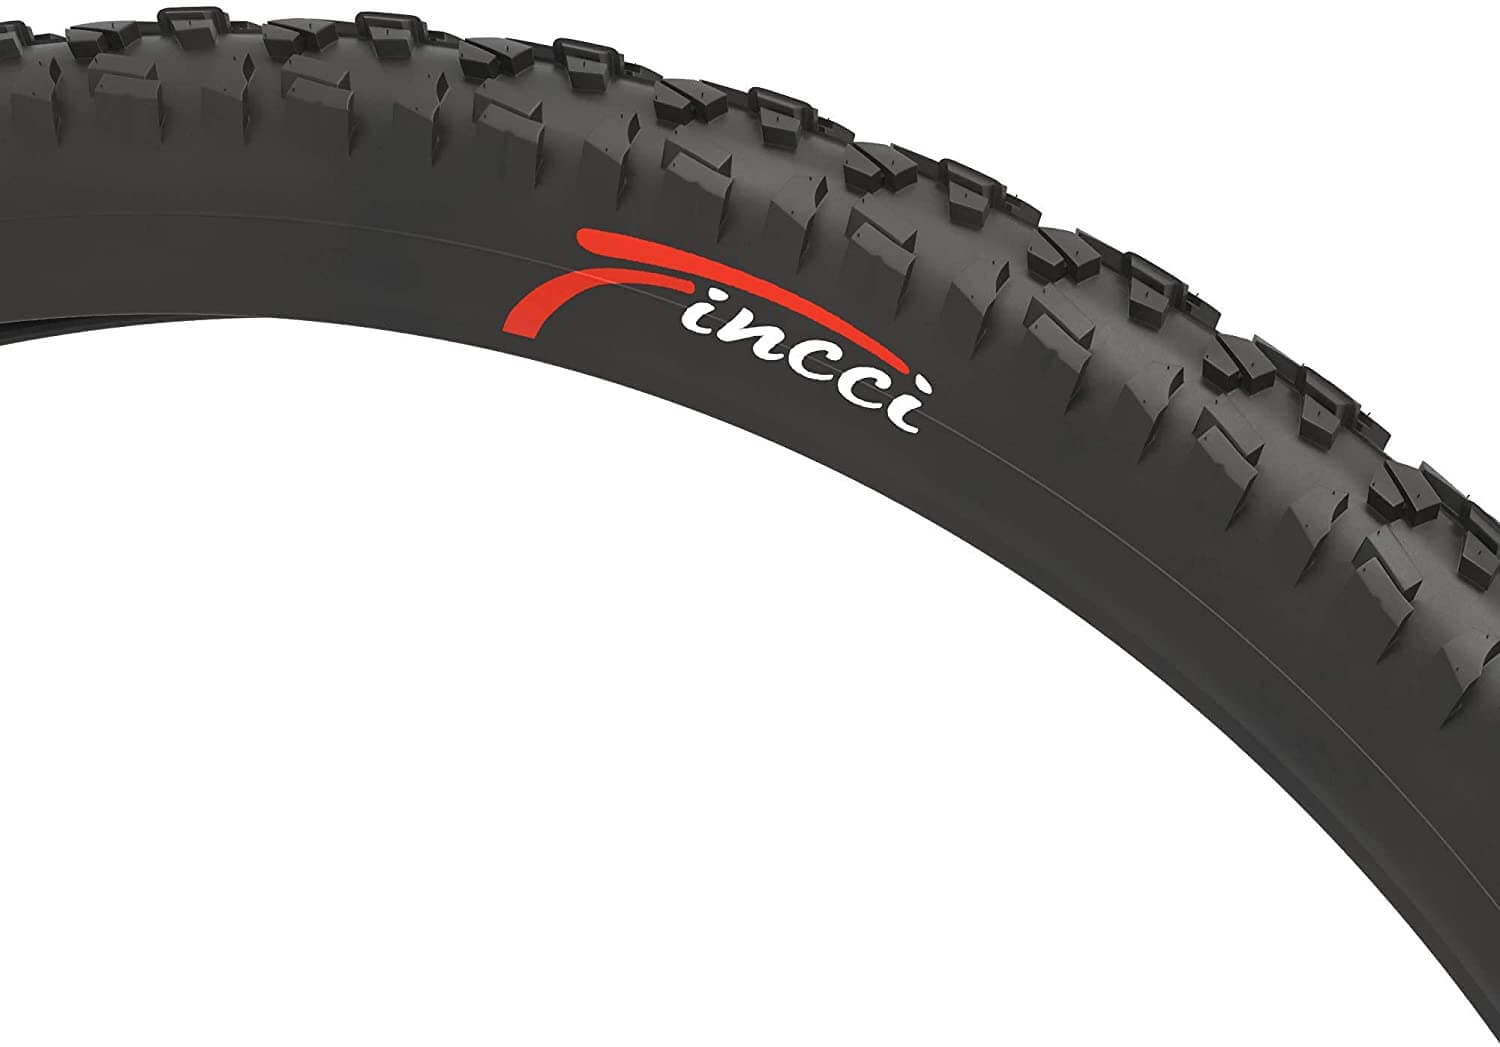 Fincci 26 x 1.95 50-559 MTB Tyre 60 TPI with Antipuncture